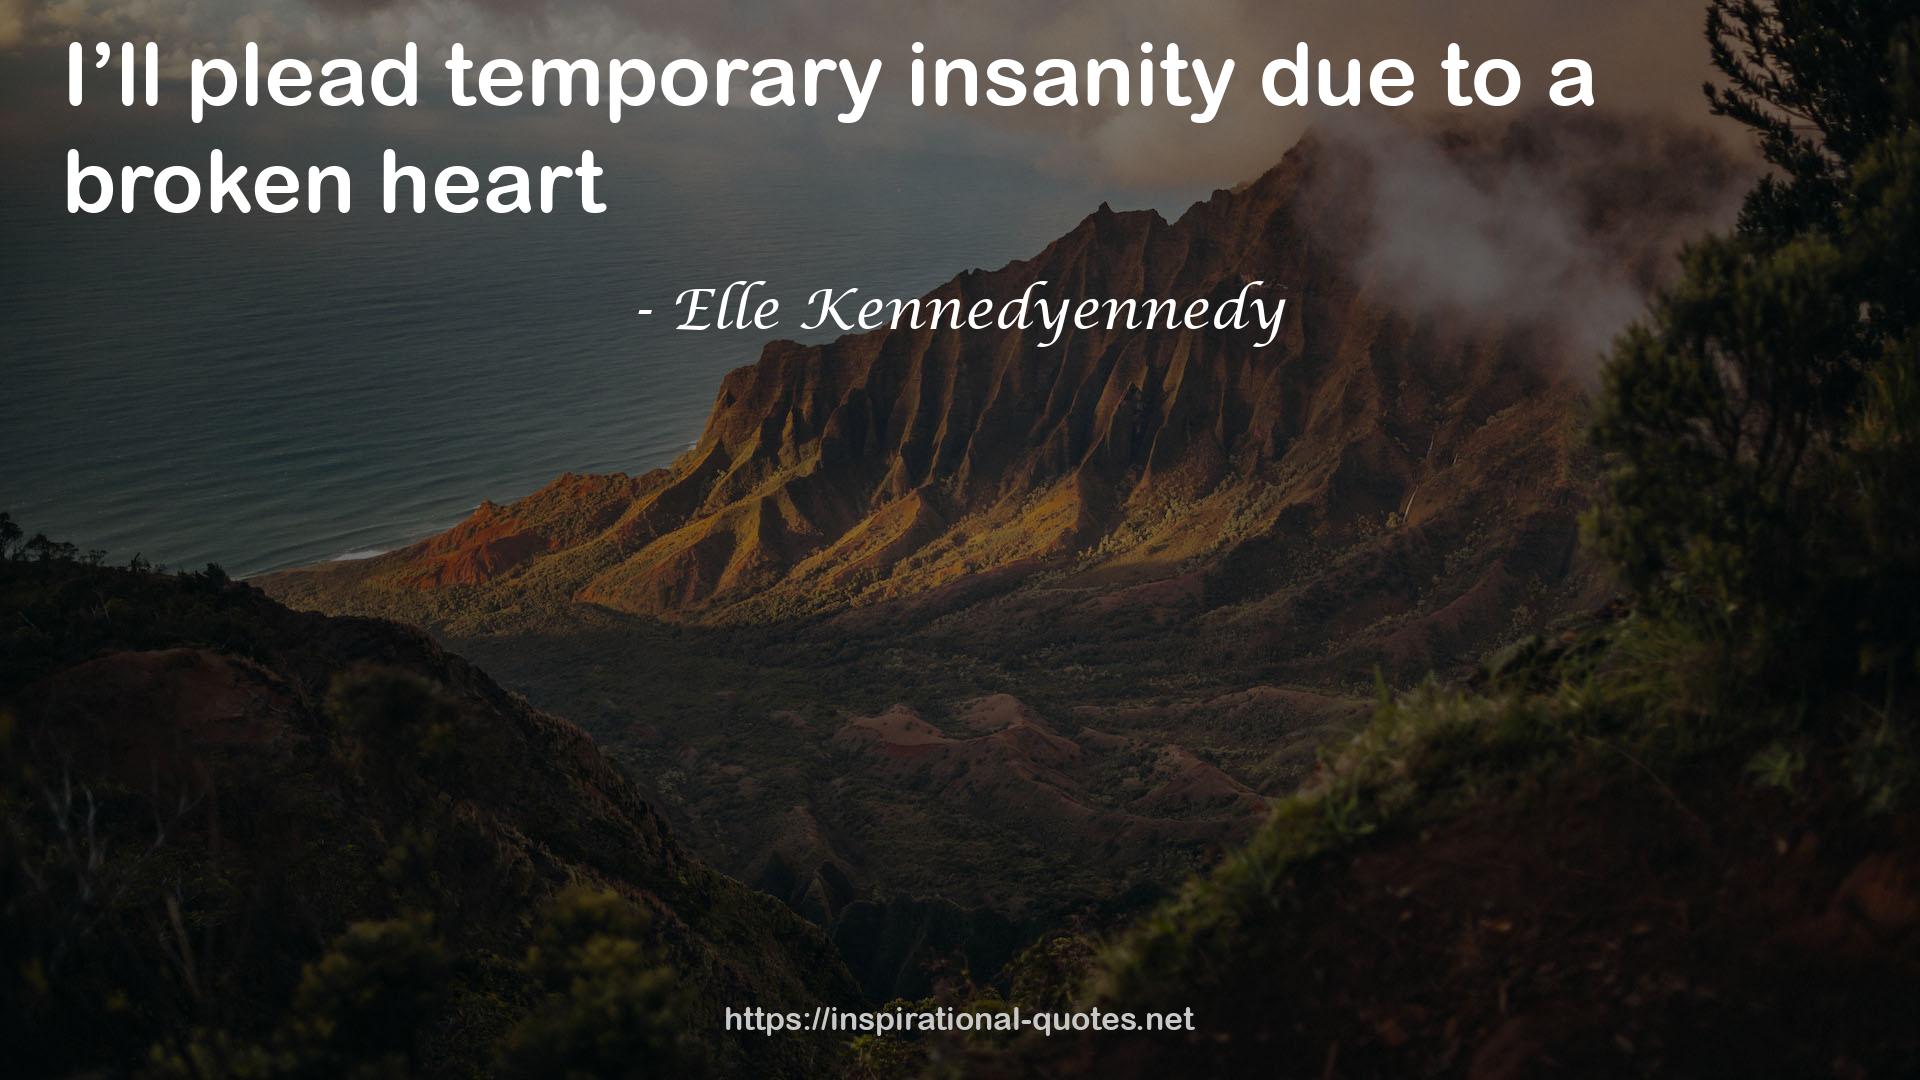 Elle Kennedyennedy QUOTES